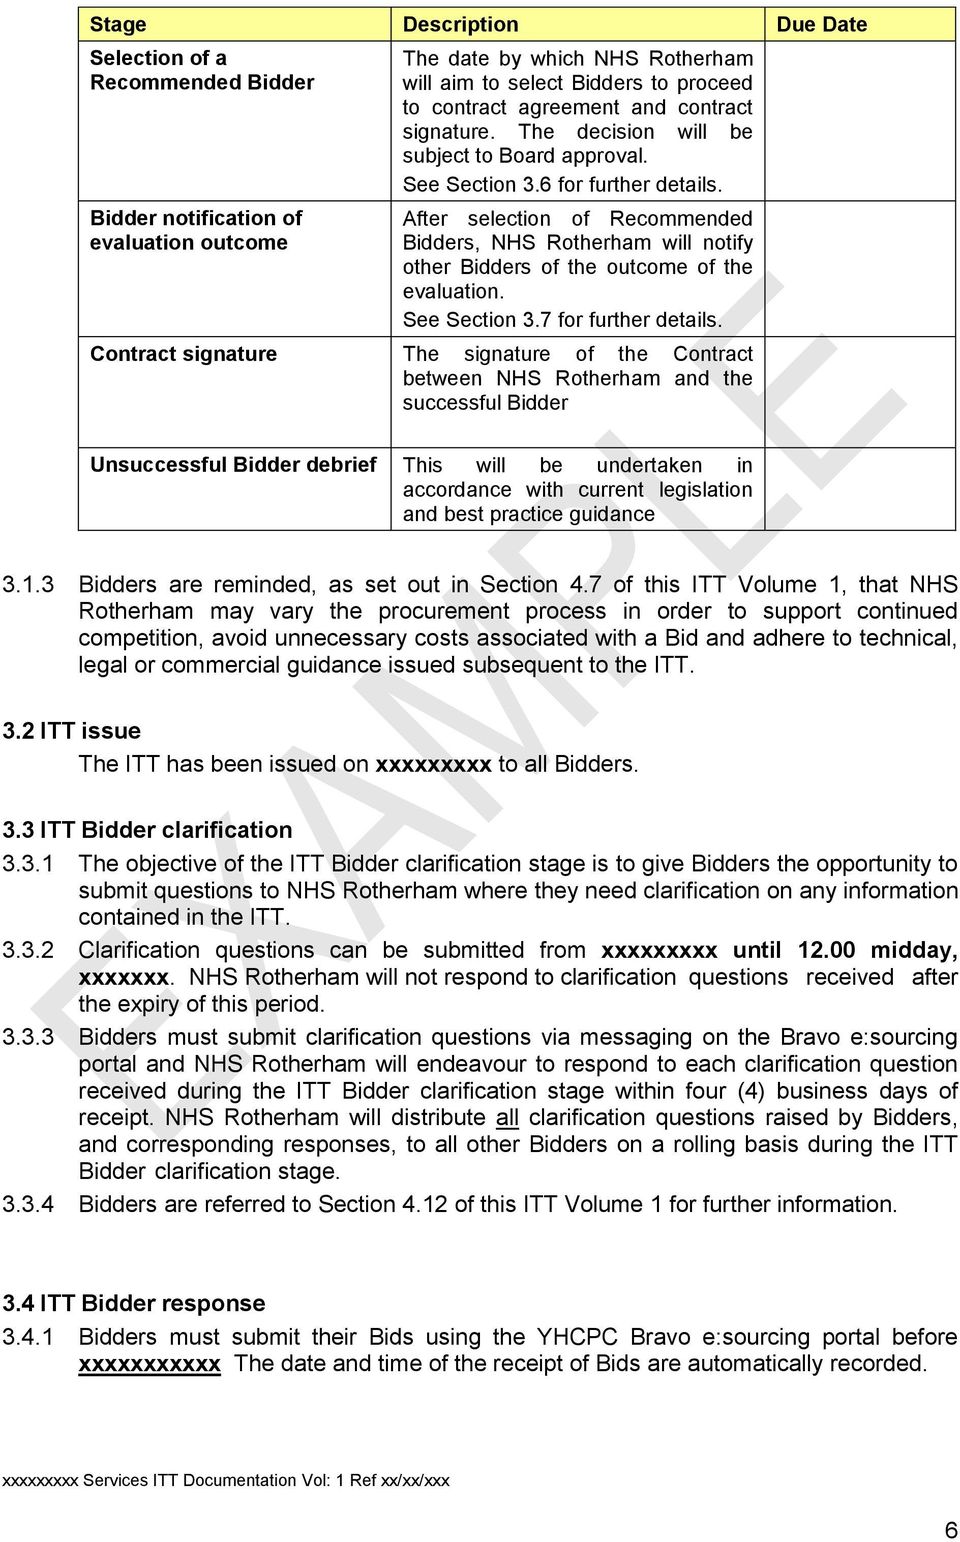 After selection of Recommended Bidders, NHS Rotherham will notify other Bidders of the outcome of the evaluation. See Section 3.7 for further details.